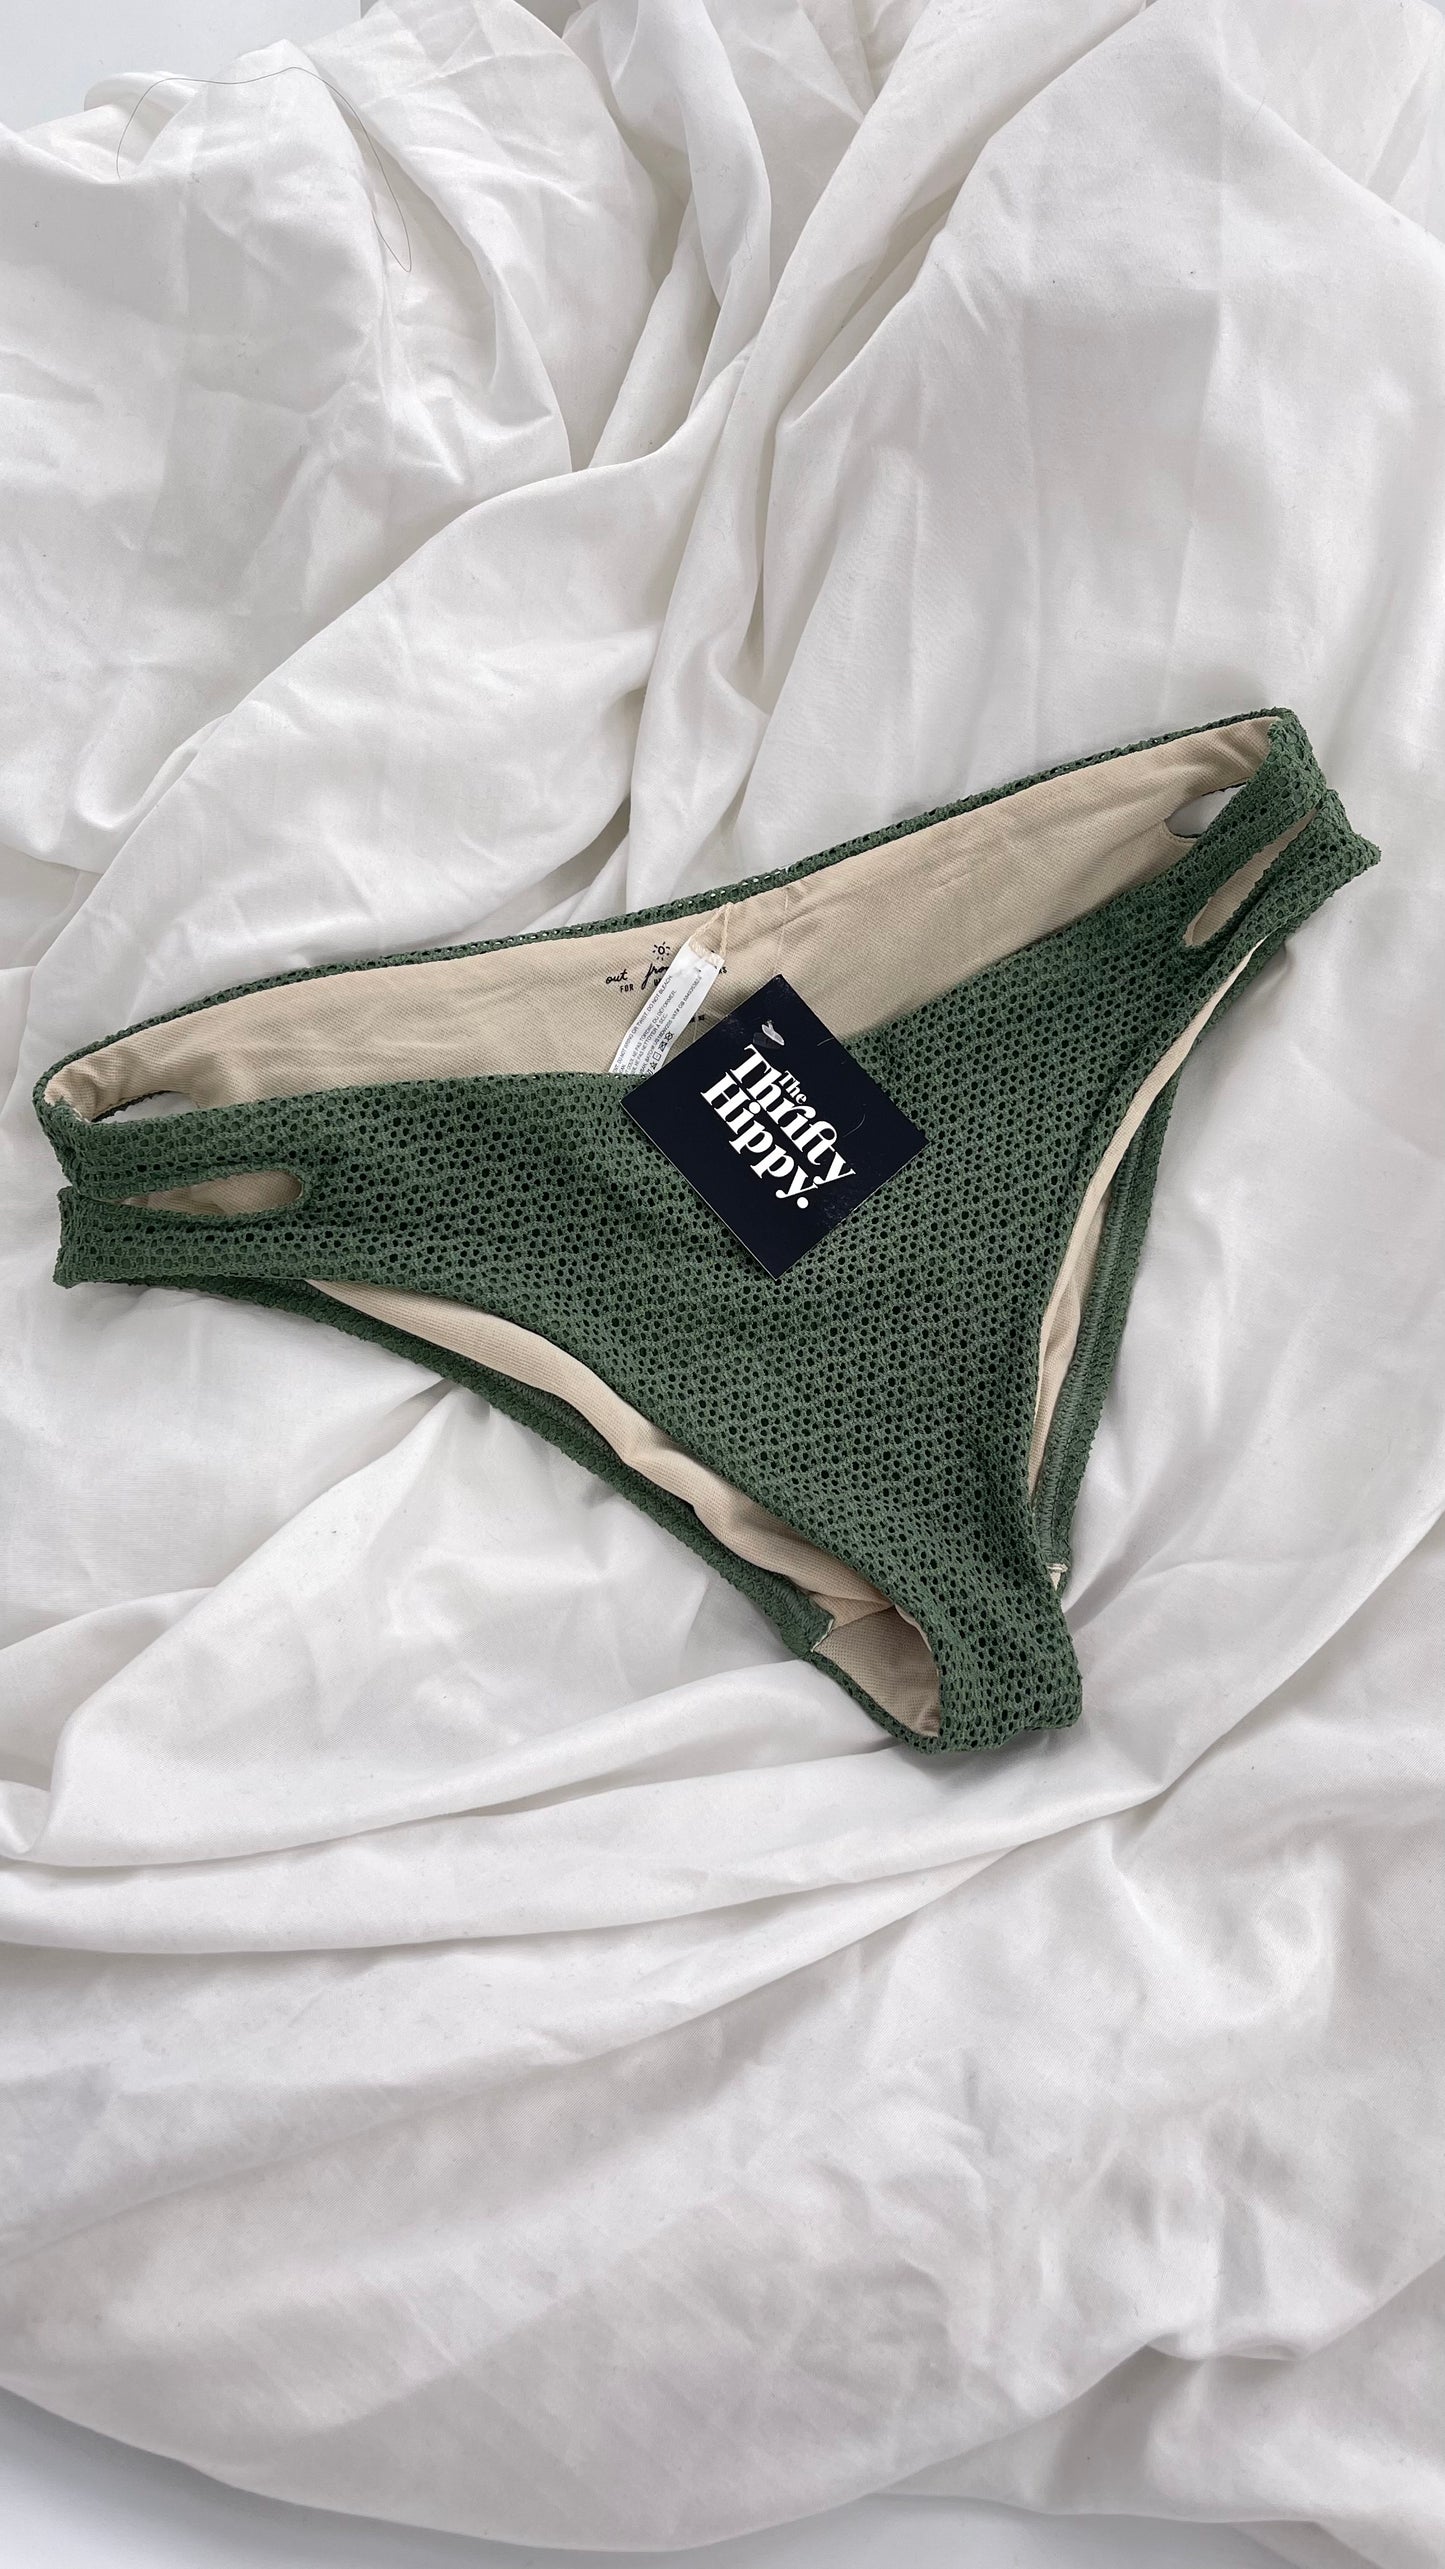 Urban Outfitters Out From Under Green Lacy Swim Bottoms (Medium)